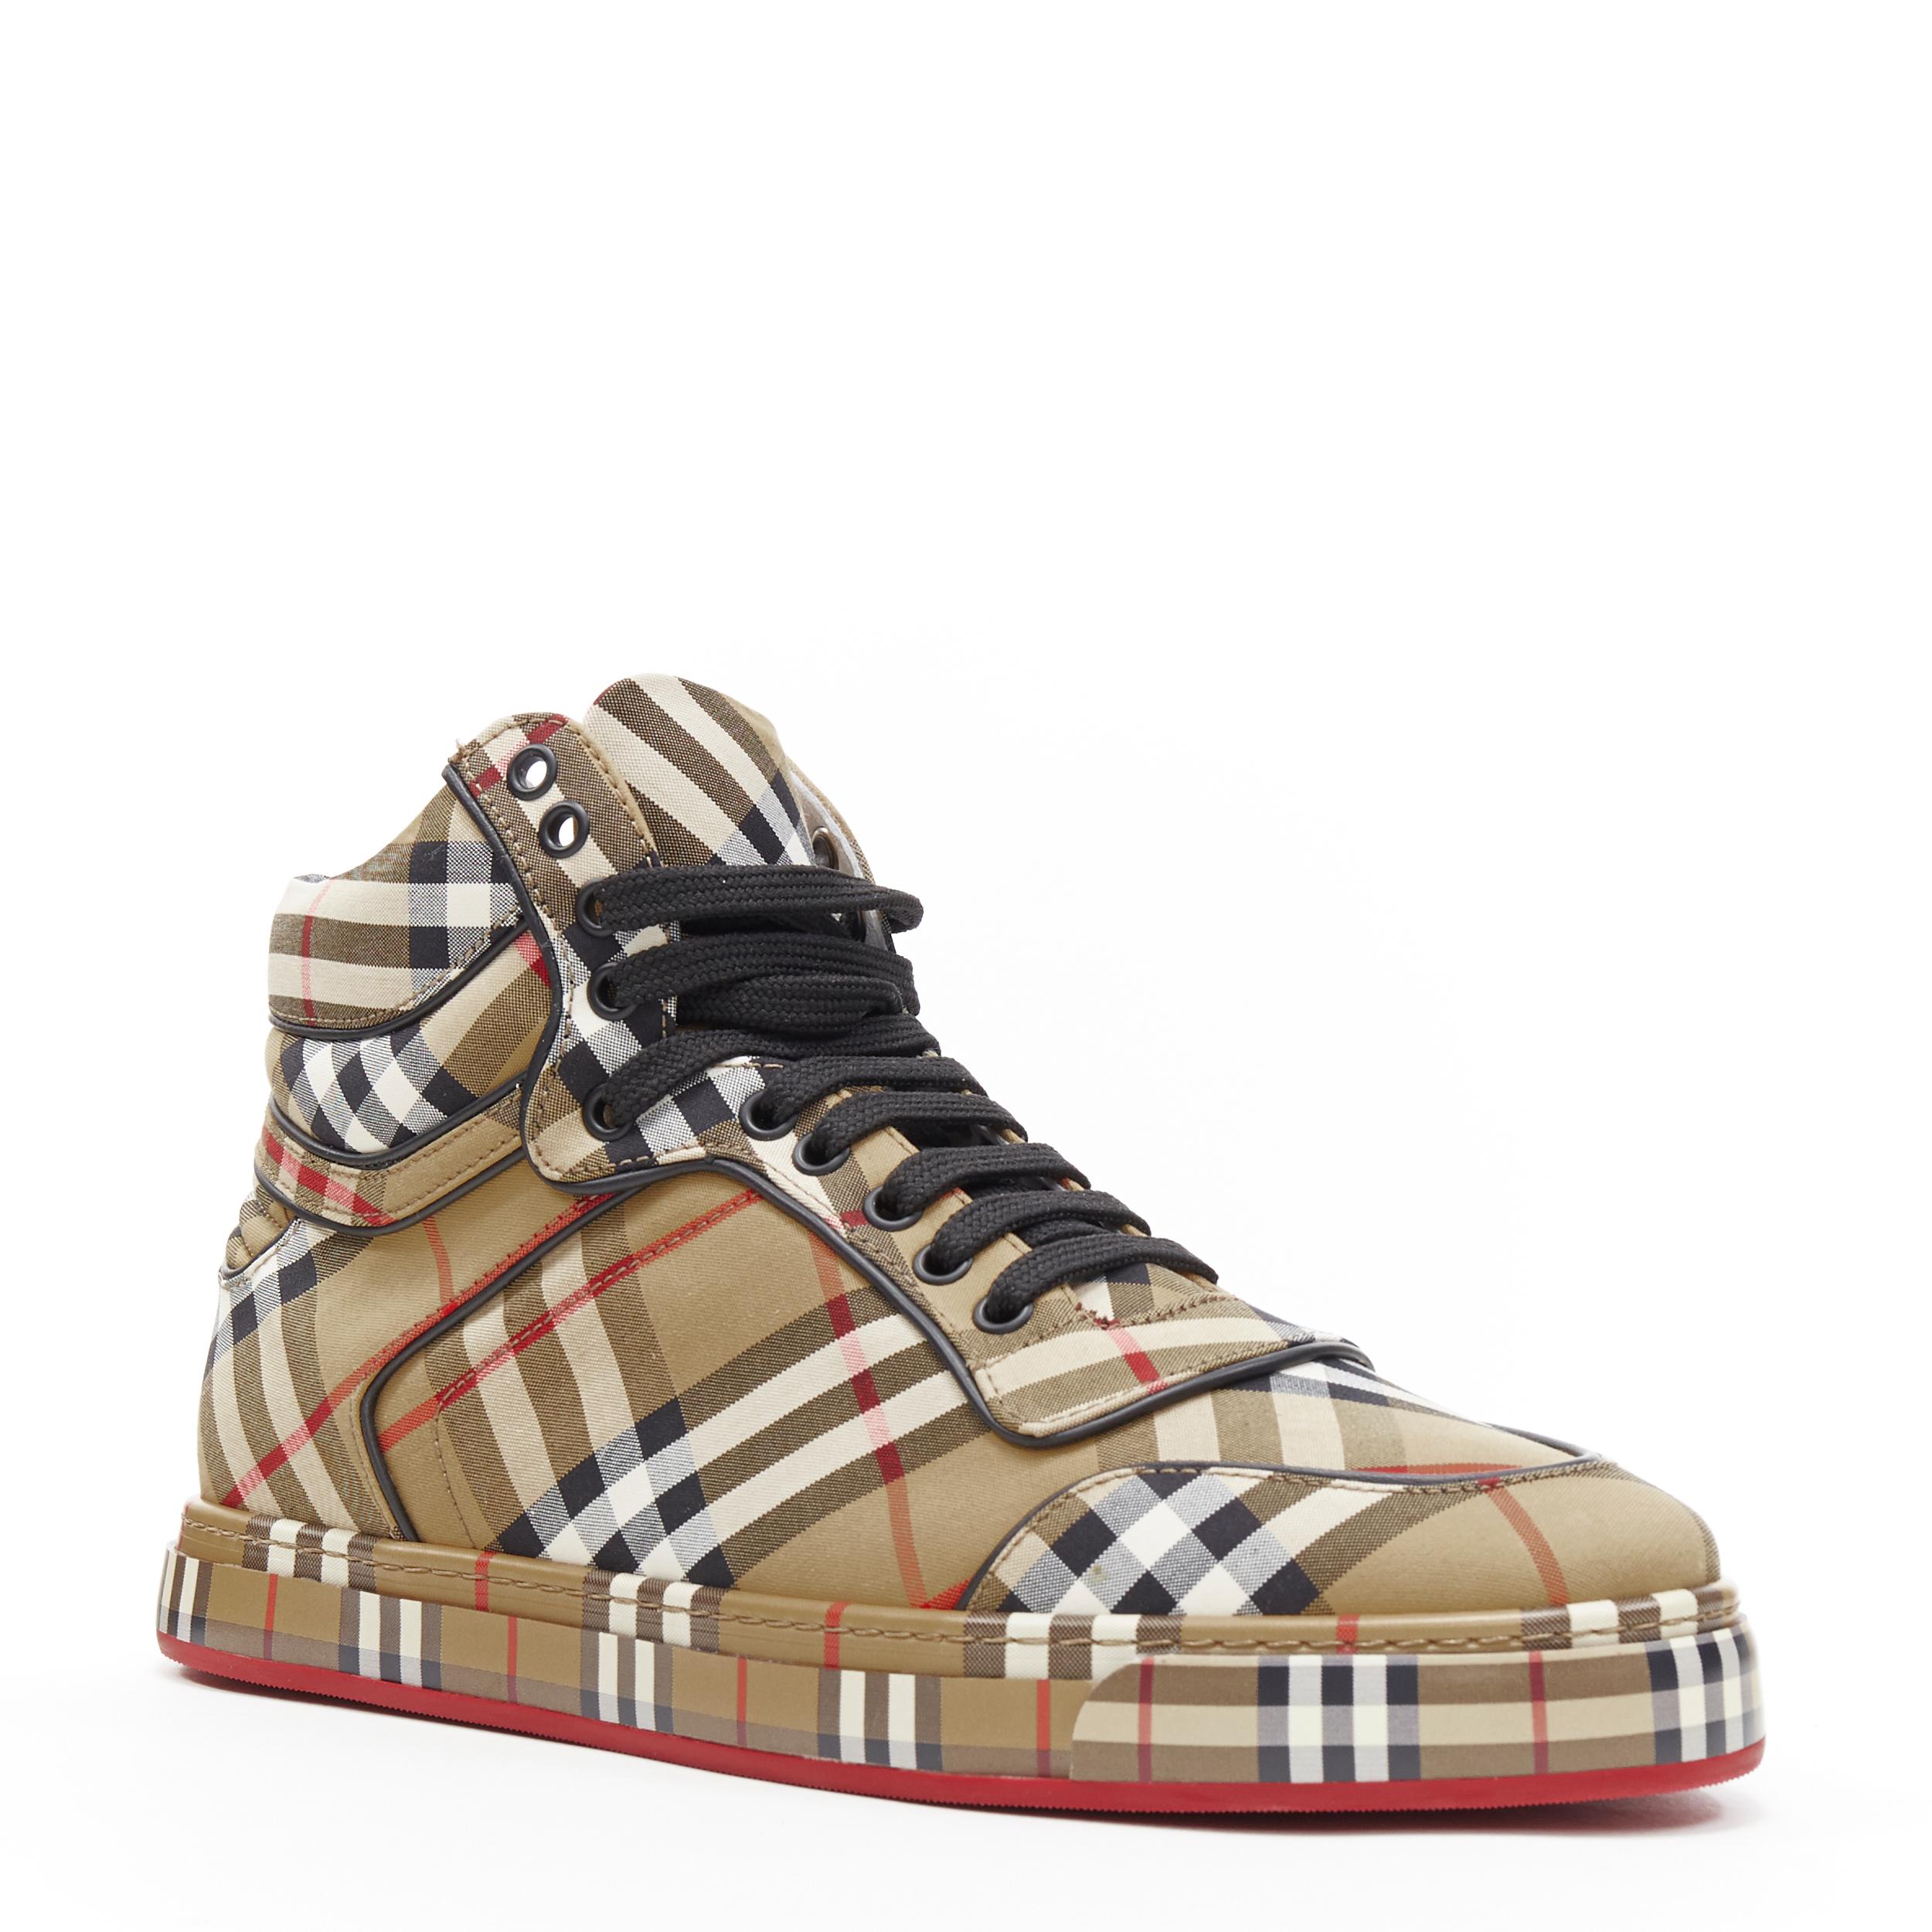 new BURBERRY TISCI Redford Antique Yellow House Check high top sneakers EU45
Brand: Burberry
Designer: Riccardo Tisci
Collection: 2019
Model Name / Style: Redford
Material: Cotton
Color: Brown
Pattern: Check
Closure: Lace up
Lining material: